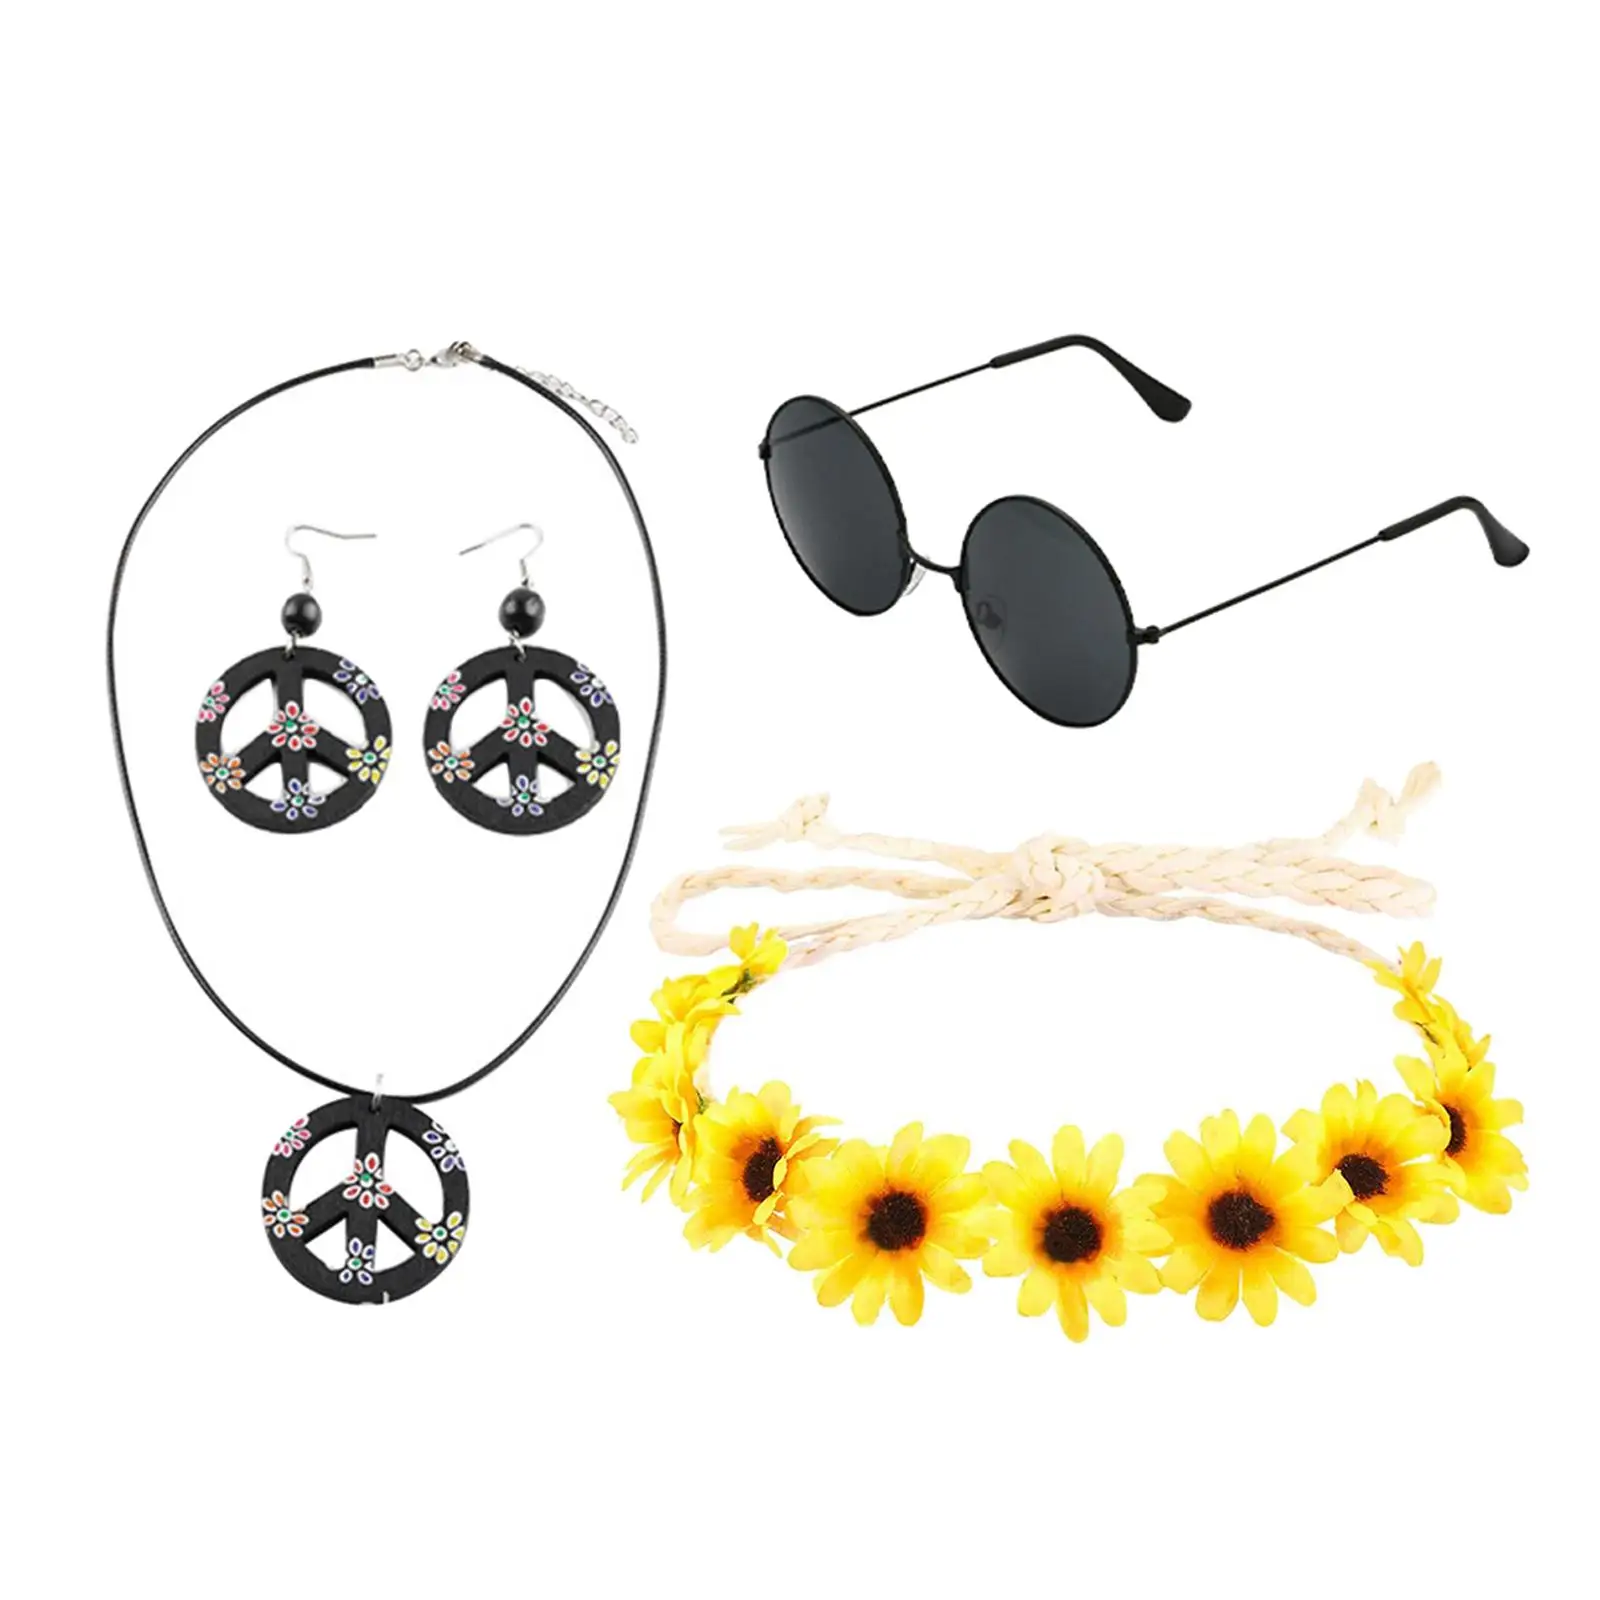 Hippie Costume Accessories Set Cosplay 60S 70S Dressing Outfits Women Men for Music Festivals Party Hippie Costume Halloween